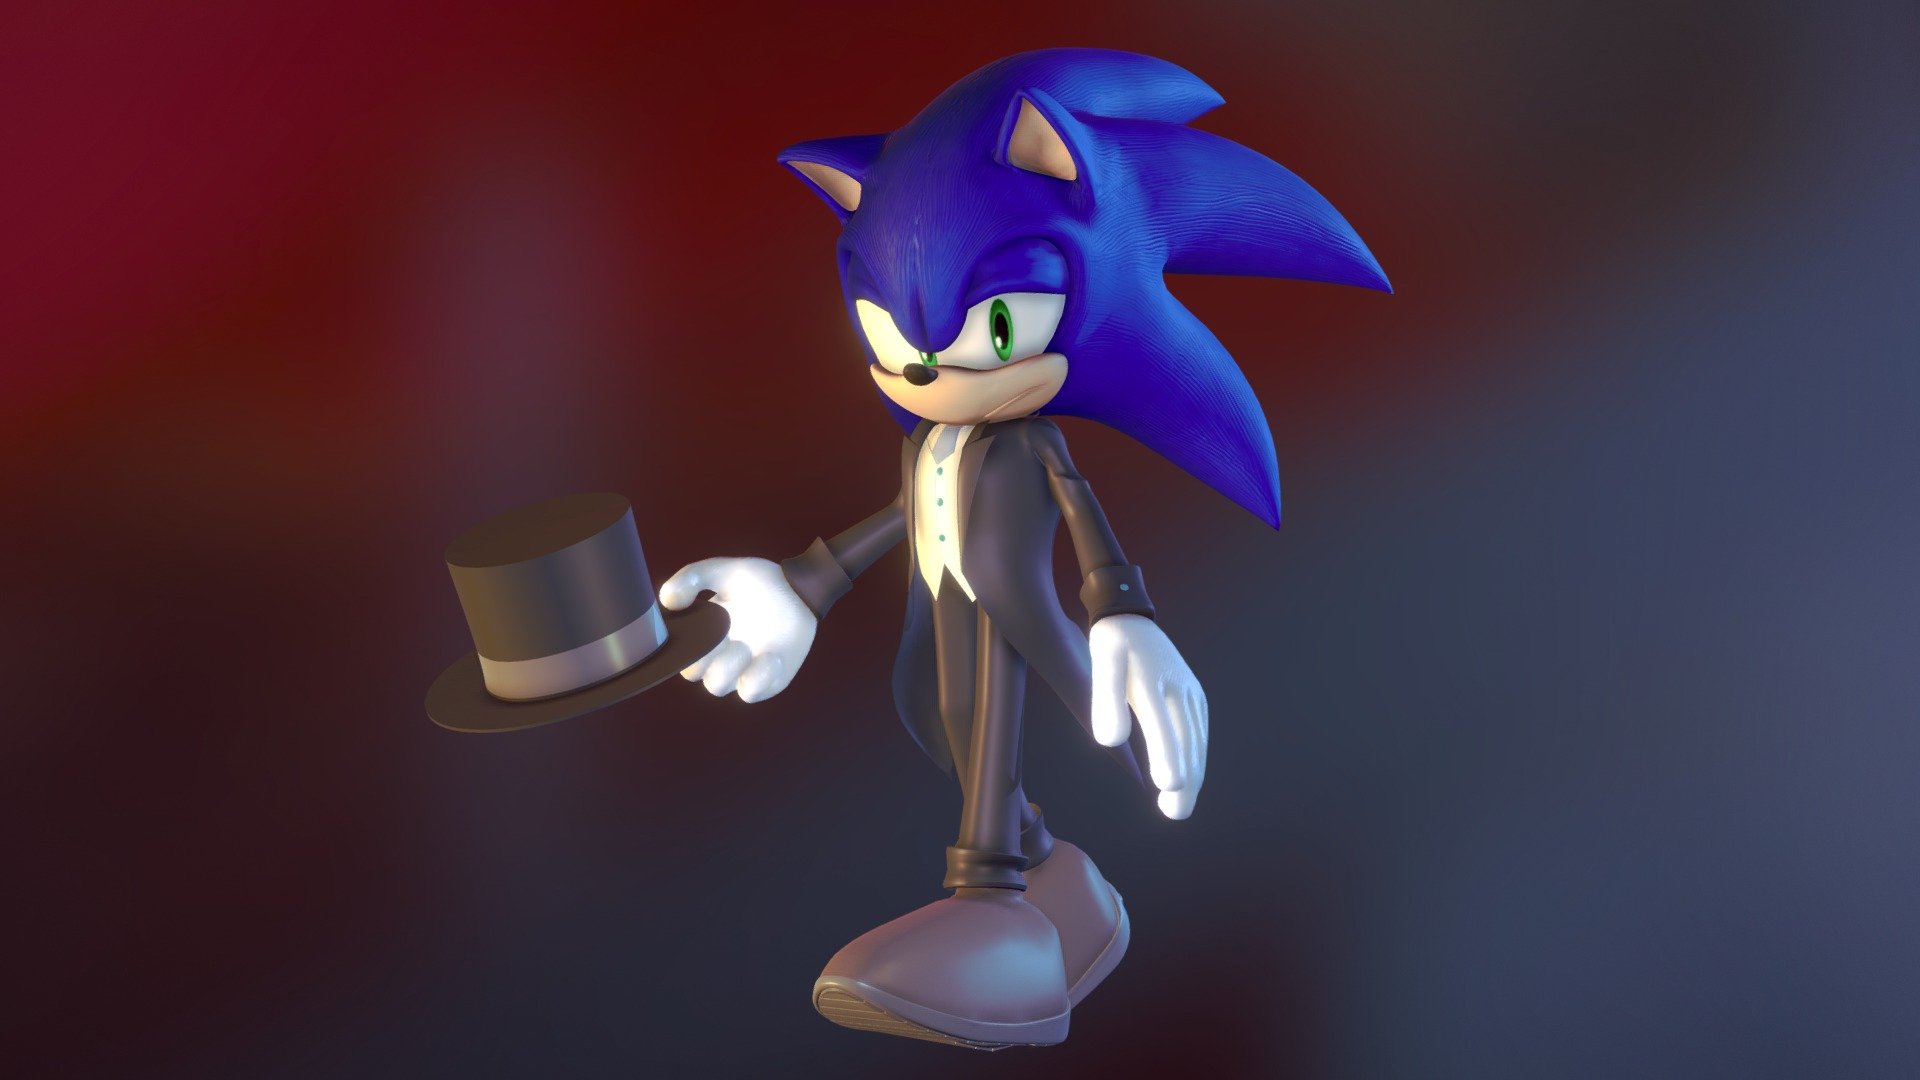 sonic ready for a night on the town
clothing modeled by me.
music:1-18 Evening Dreamscape pt1 - For Sunset Star Act 1
also on Deviant art: https://gabrielgt12.deviantart.com/art/sonic-ready-for-a-night-on-the-town-630144525 - sonic in tuxedo - 3D model by Gabrielgt16 3d model